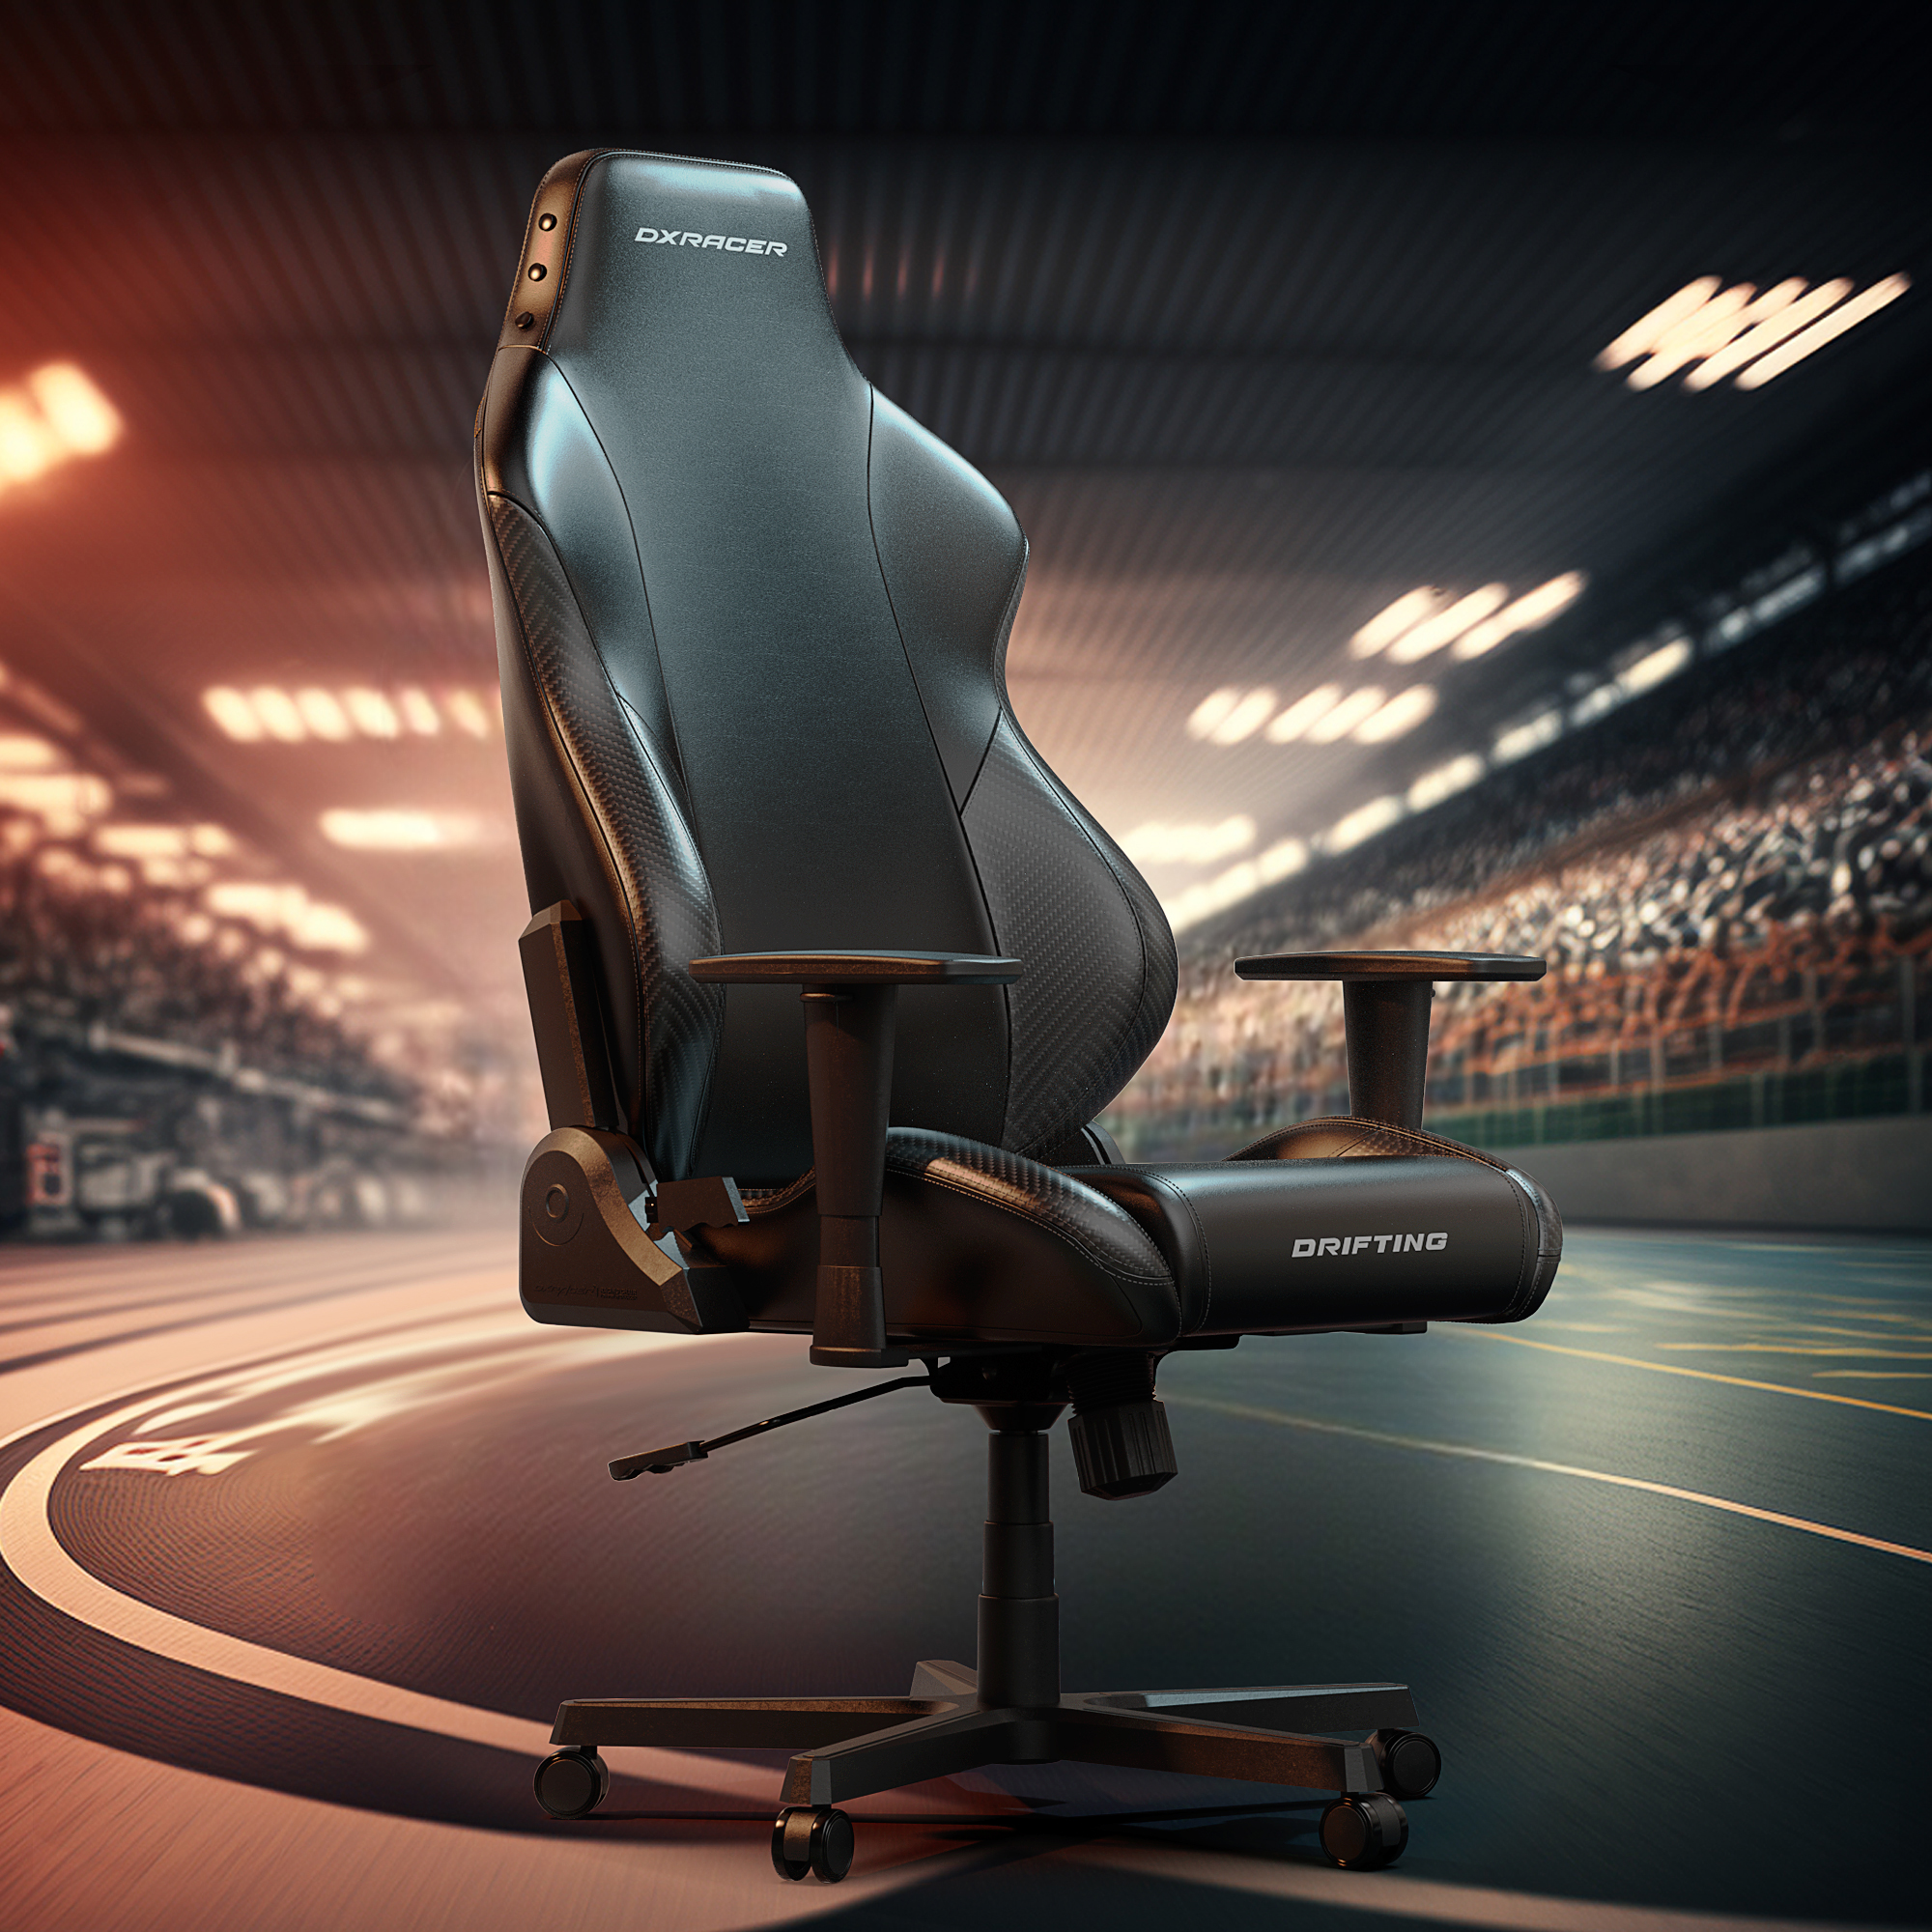 Mount Vesuv bison hit Gaming Chair | Best Gaming Chair Brand For Gamers | DXRacer USA